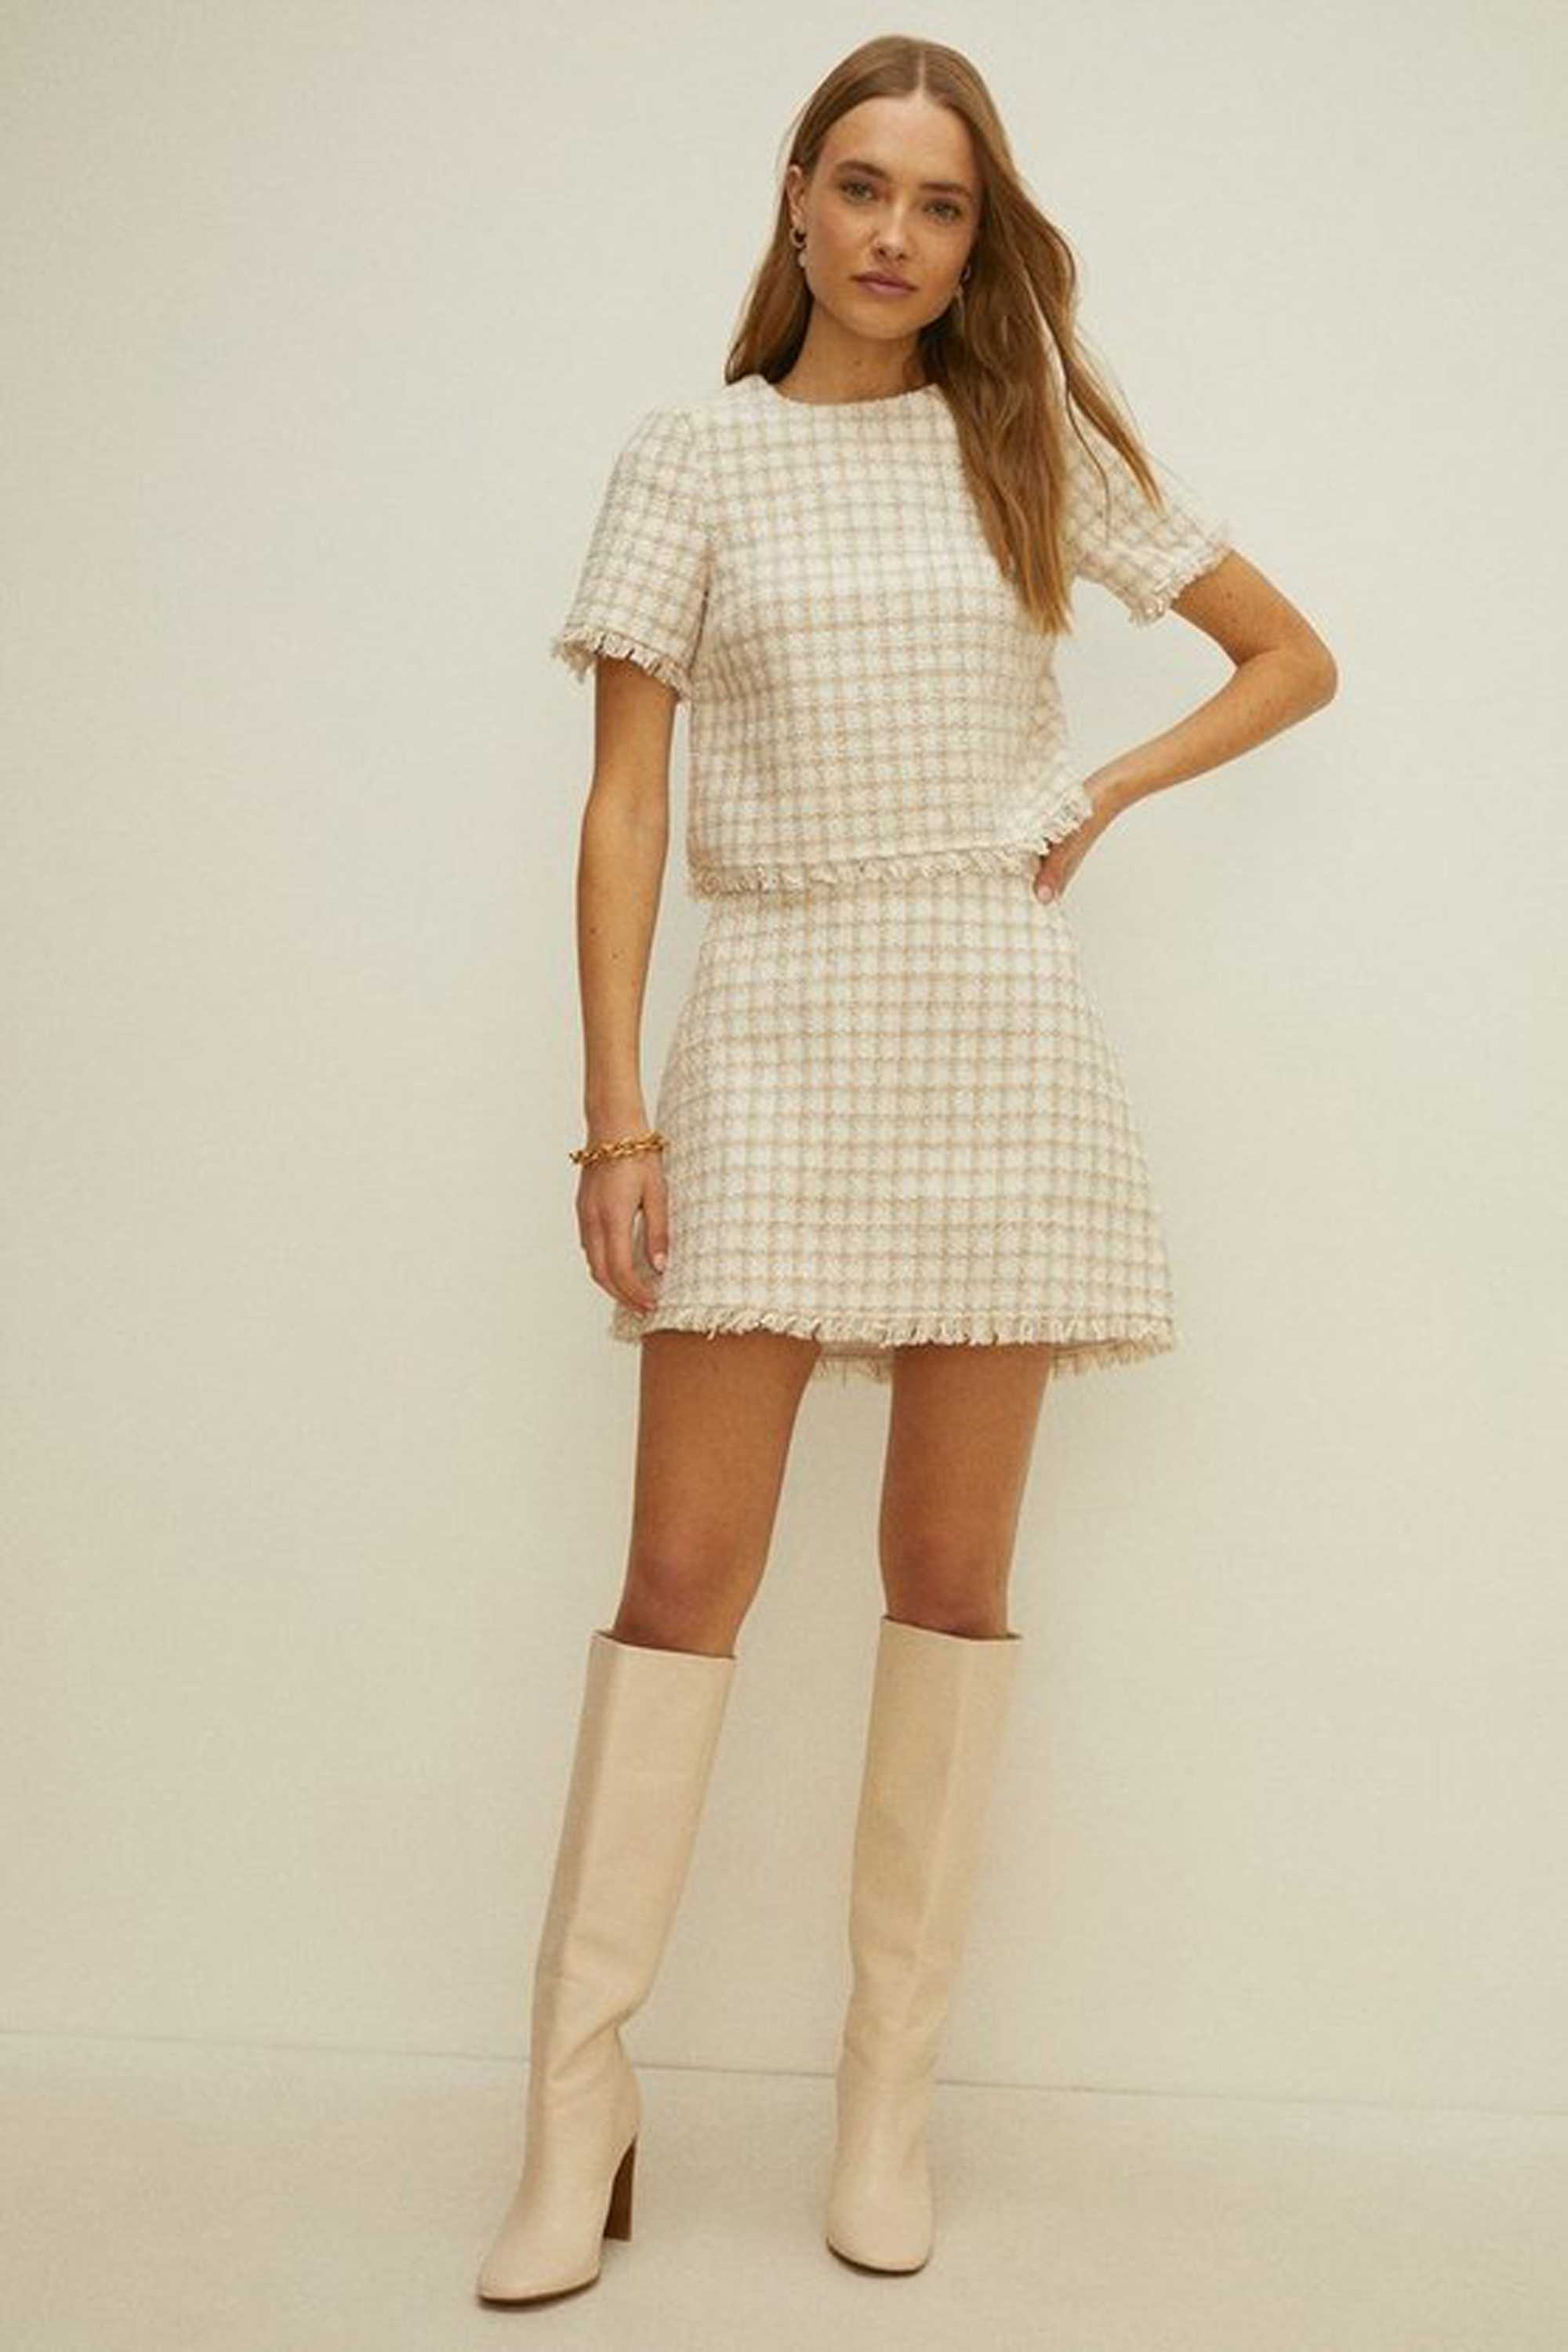 Oasis Tweed Fringed Co-Ord, available to rent from Hirestreet